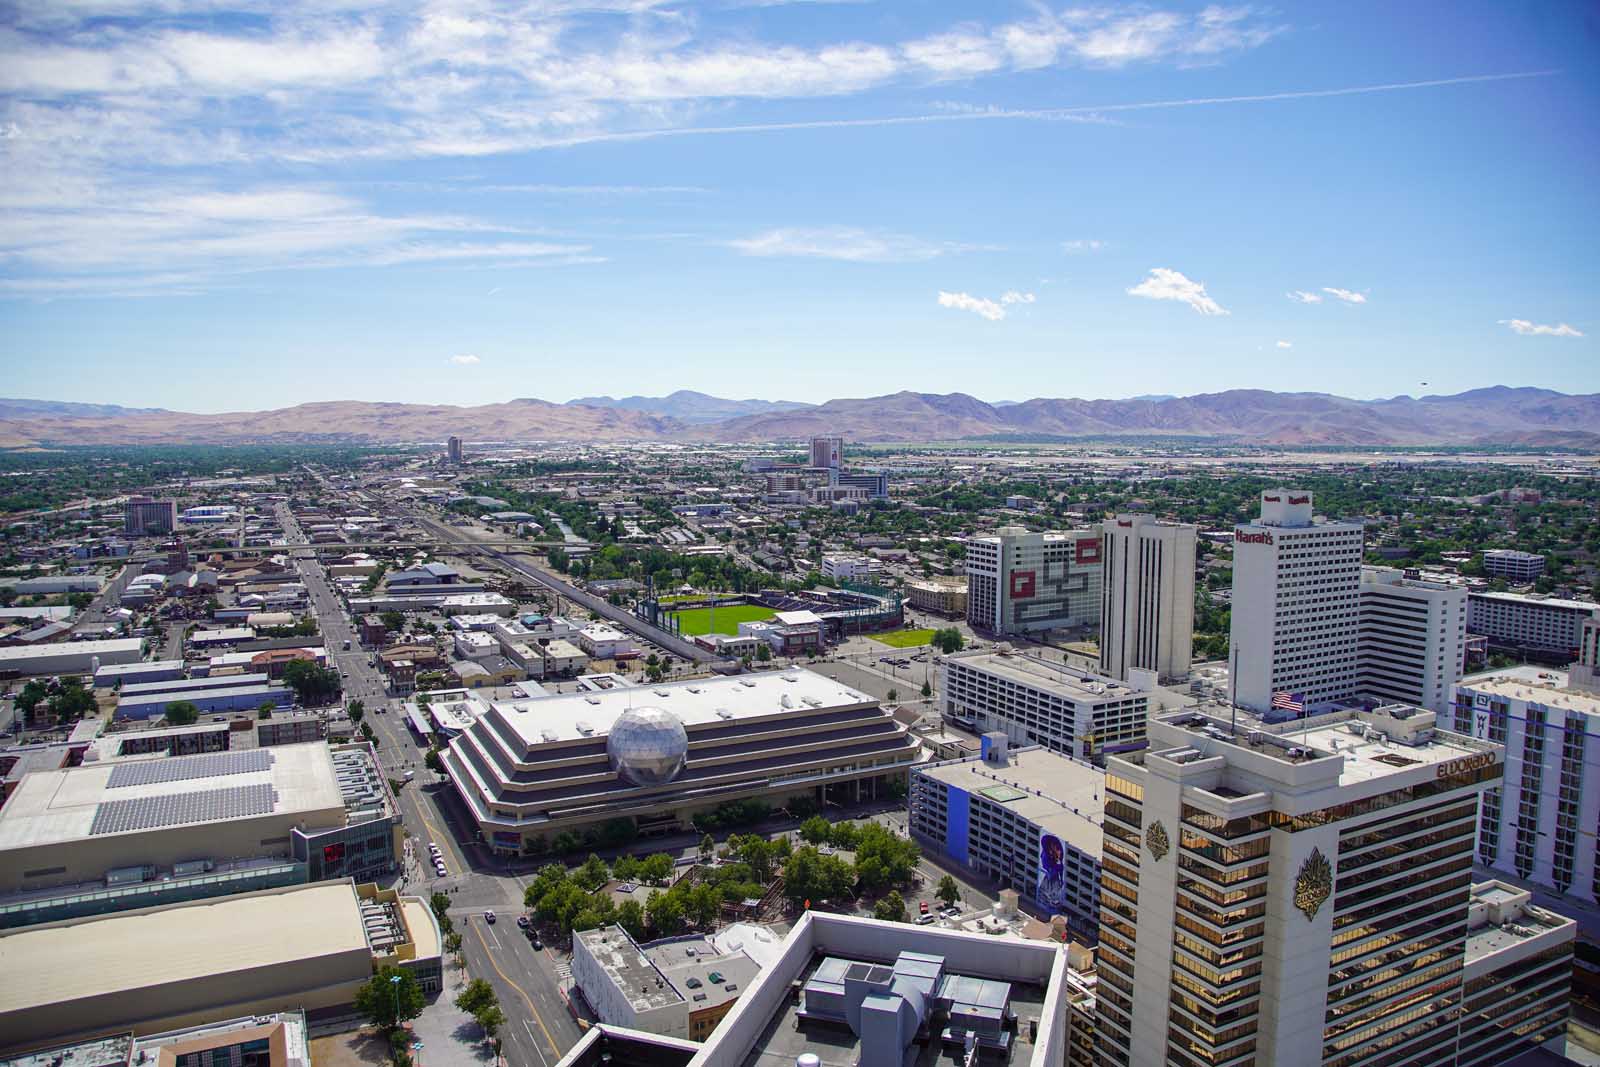 30 Best Things To Do In Reno Nv